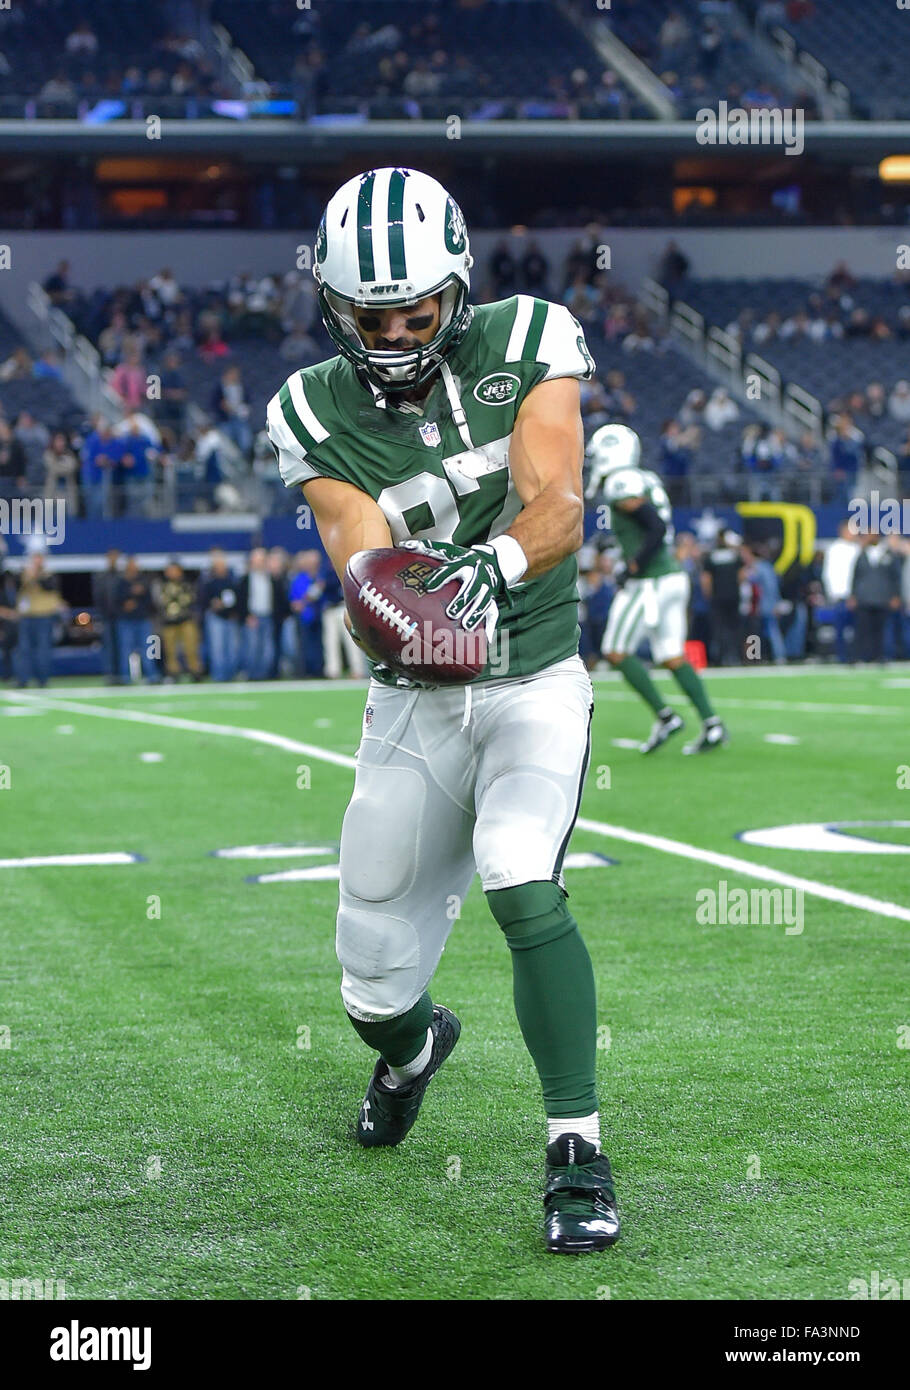 December 19th, 2015:.New York Jets wide receiver Eric Decker (87) catches a  pass during warmups at an NFL football game between the New York Jets and  Dallas Cowboys on Saturday night at